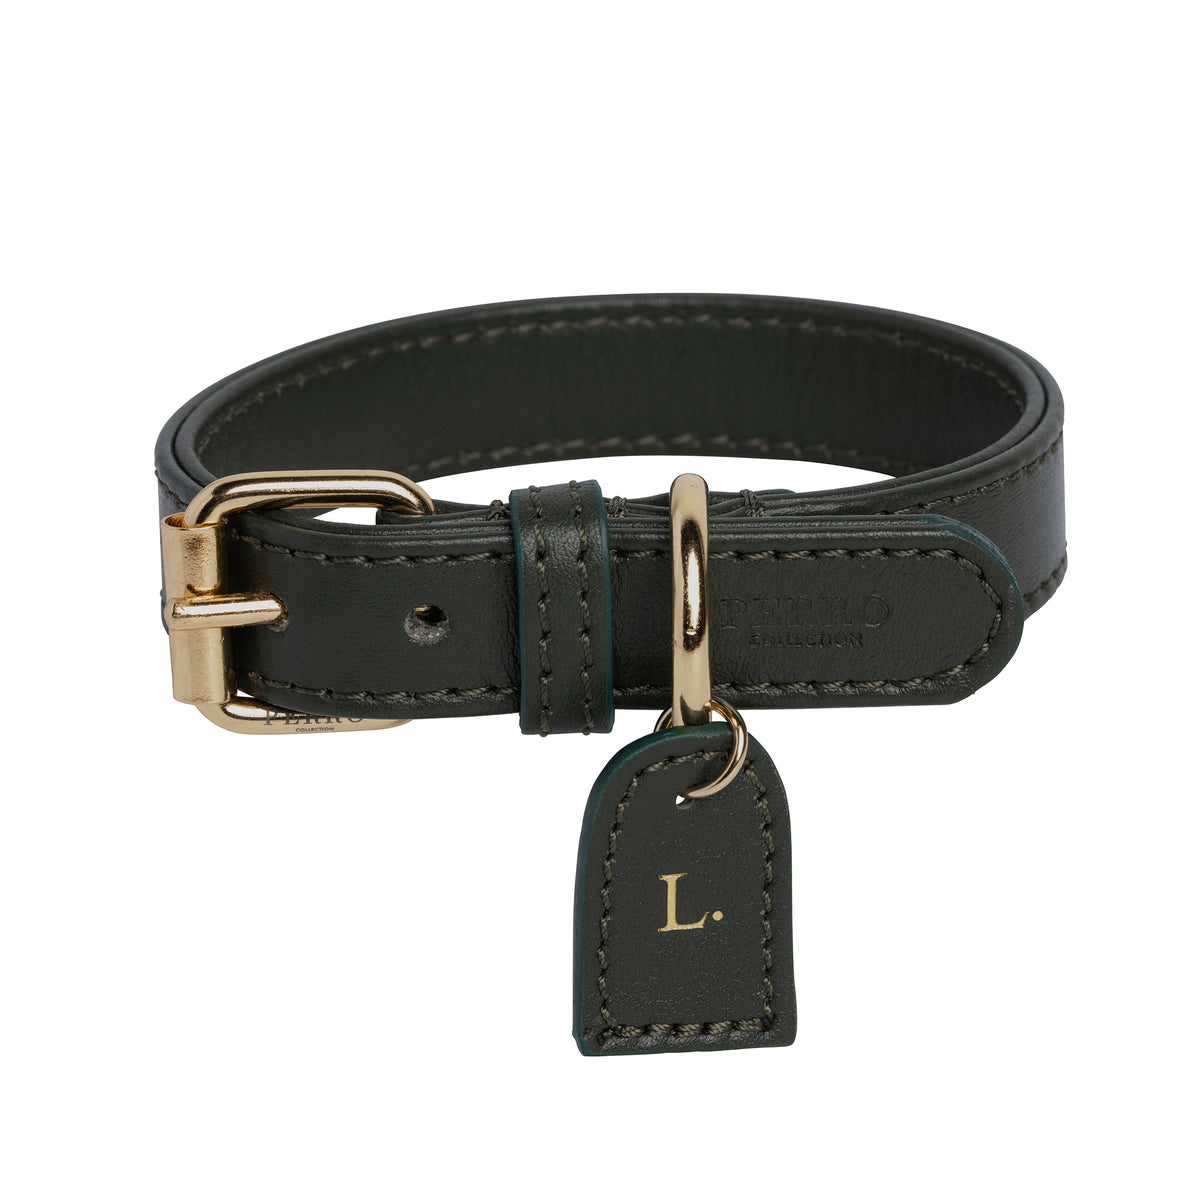 aprococo  CHANEL Dog Collar and Leash SET  Gold Chain with Black Woven  Leather  CC Charm